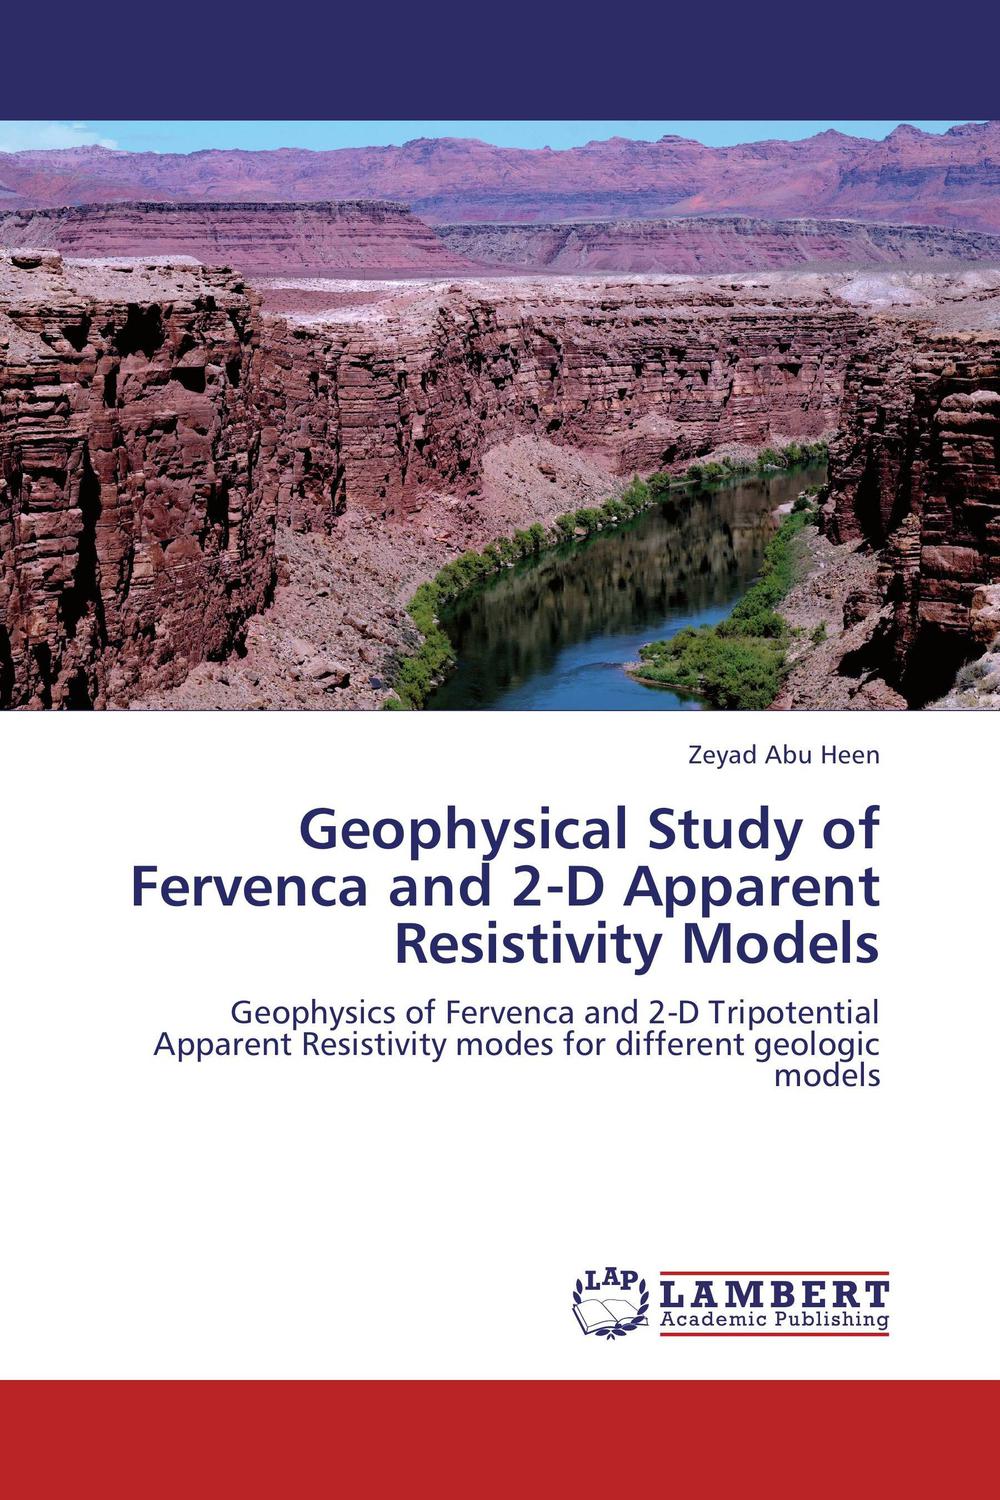 geophysical study of fervenca and 2 d apparent resistivity models geophysics of fervenca and 2 d tripotential